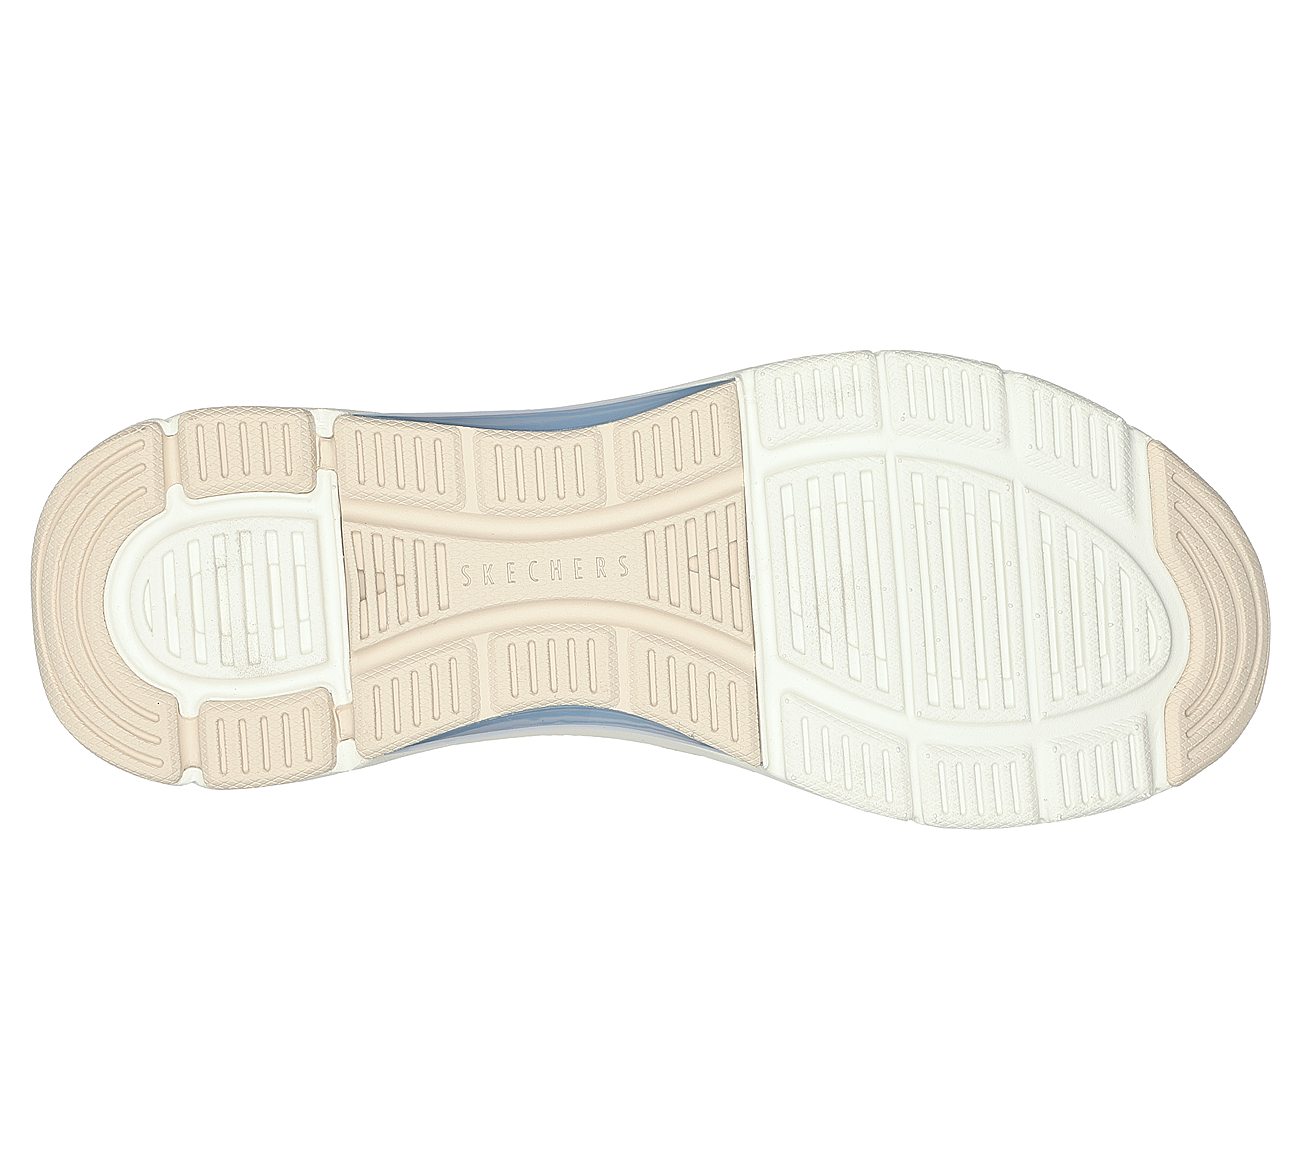 SKECH-AIR ARCH FIT - TOP PICK, NATURAL/BLUE Footwear Bottom View